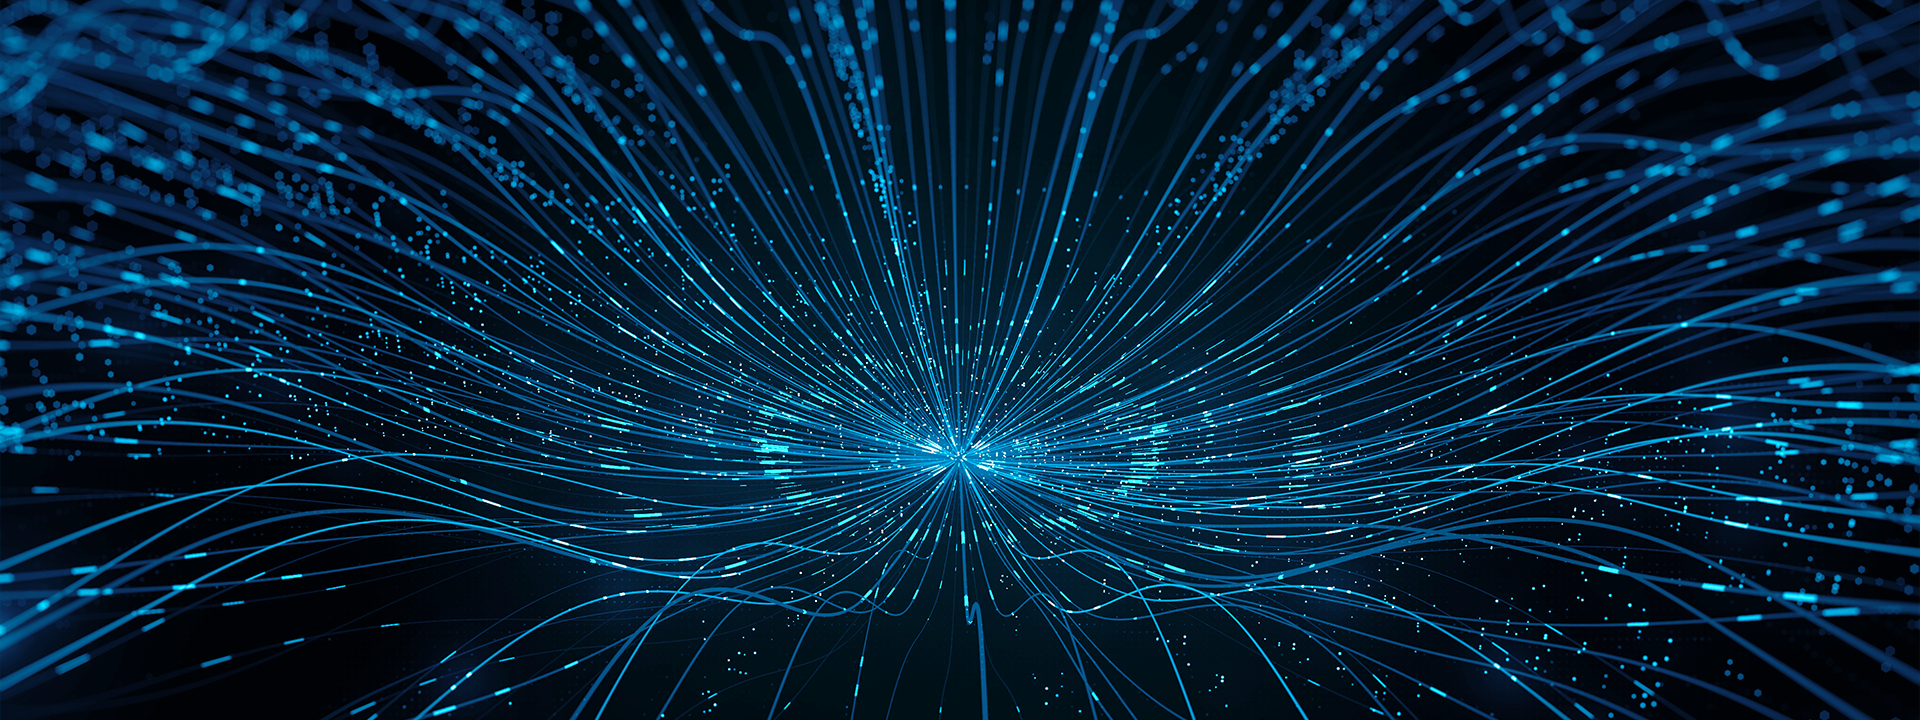 Digital abstract image of a blue glowing point with numerous lines and dots radiating outward on a dark background. 